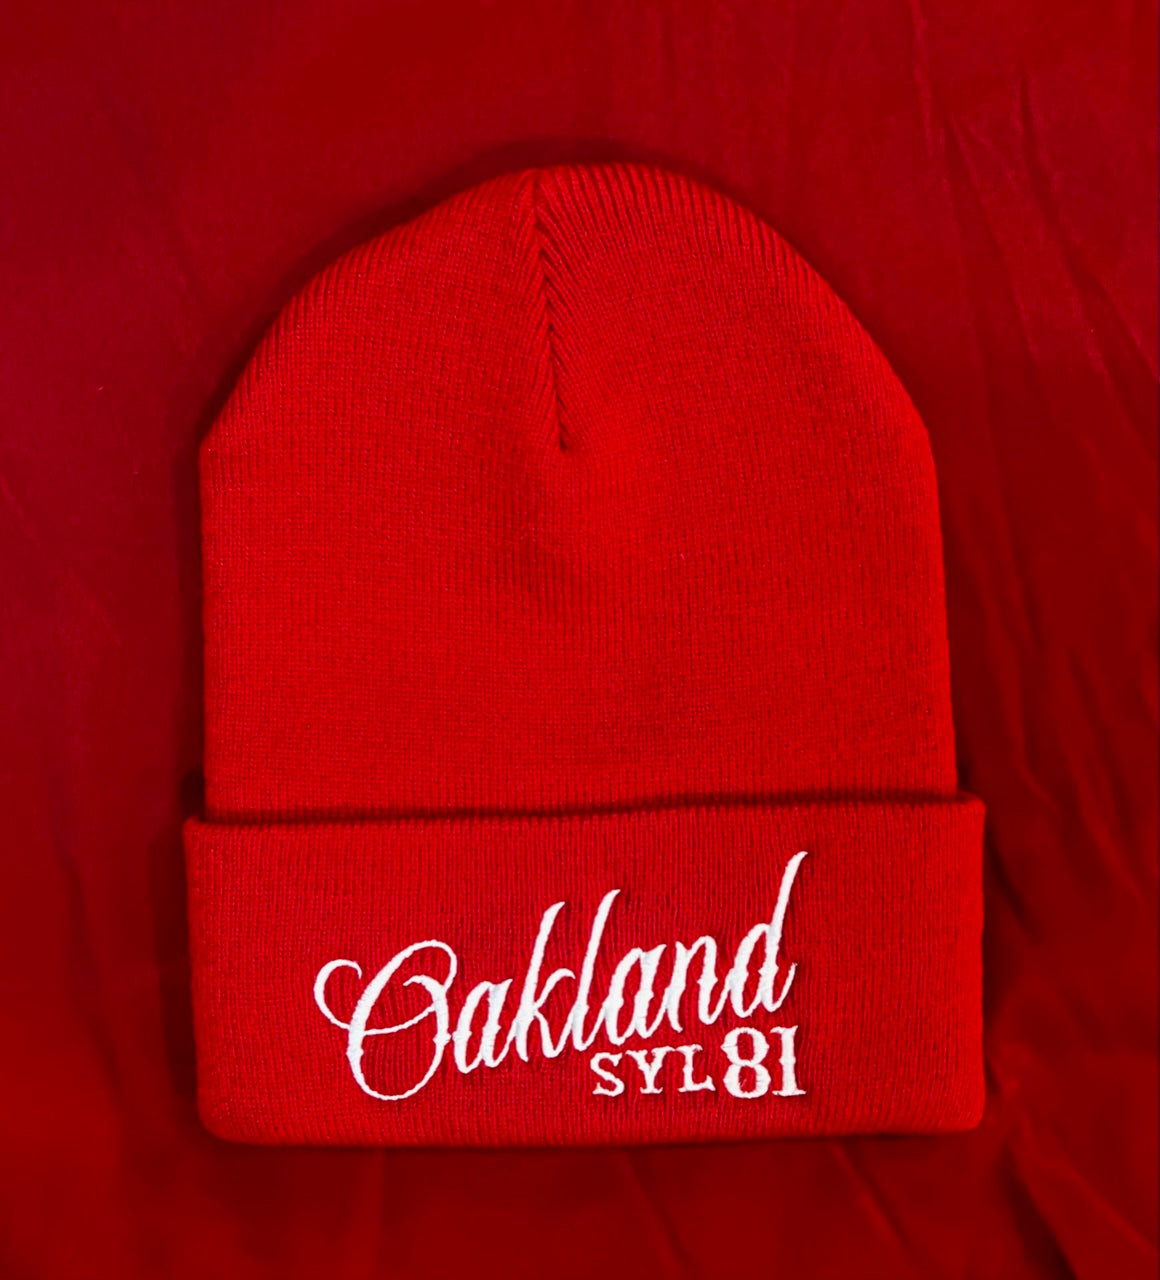 2 COLORS AVAILABLE-OAKLAND SYL 81 BEANIE